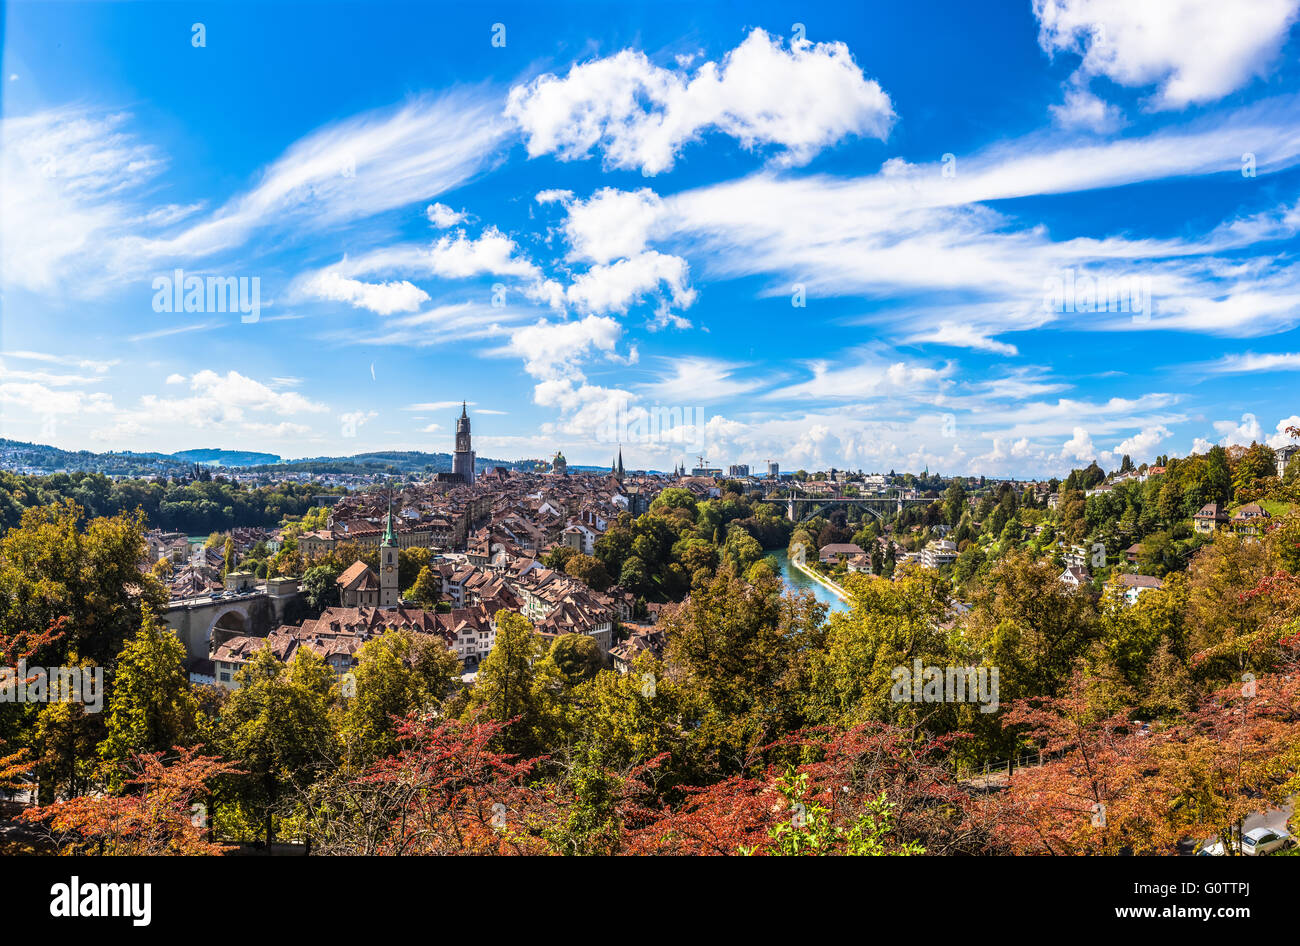 Panorama view of Berne old town from mountain top in rose garden Stock Photo